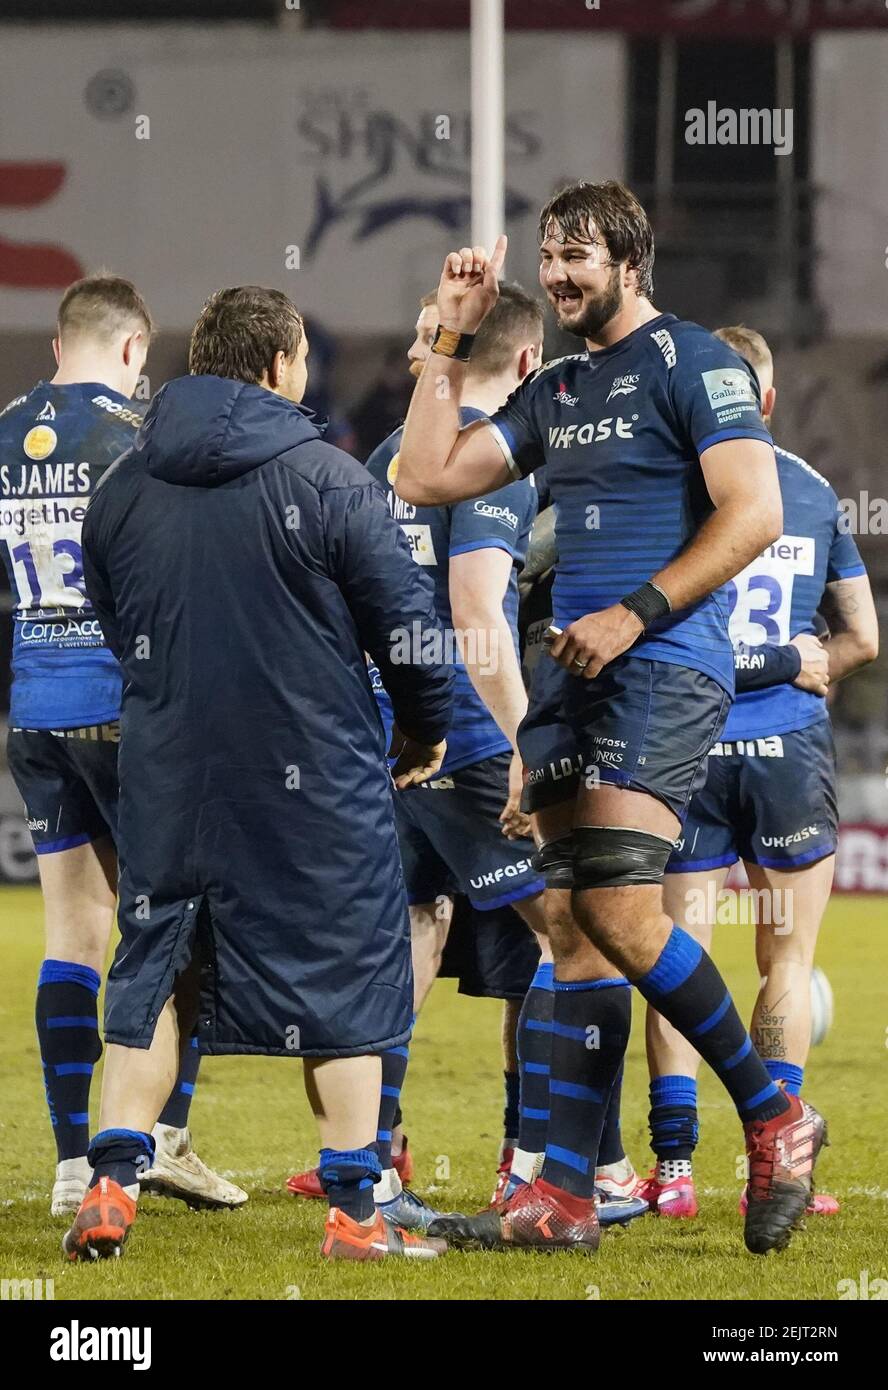 Sale Sharks Lood De Jager celebrates with prop Coenie Oosthuizen after a Gallagher Premiership Rugby Union match won by Sharks 39-0, Friday, Mar. 6, 2020, in Eccles, United Kingdom. (Photo by IOSESPA/Cal Sport Media/Sipa USA) Stock Photo